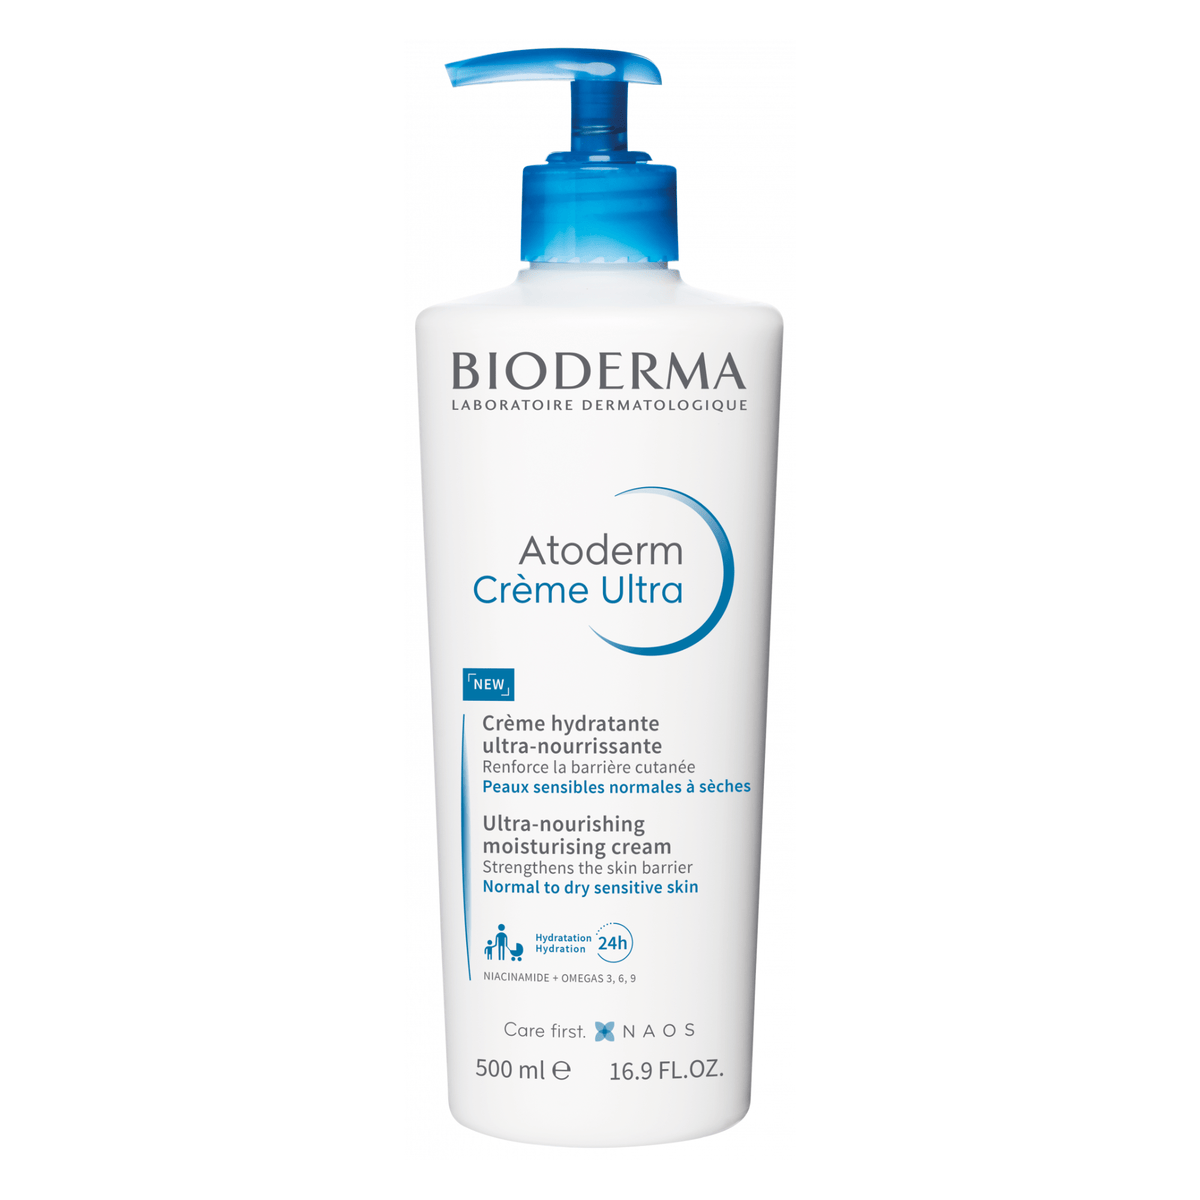 Primary Image of Atoderm Creme Ultra